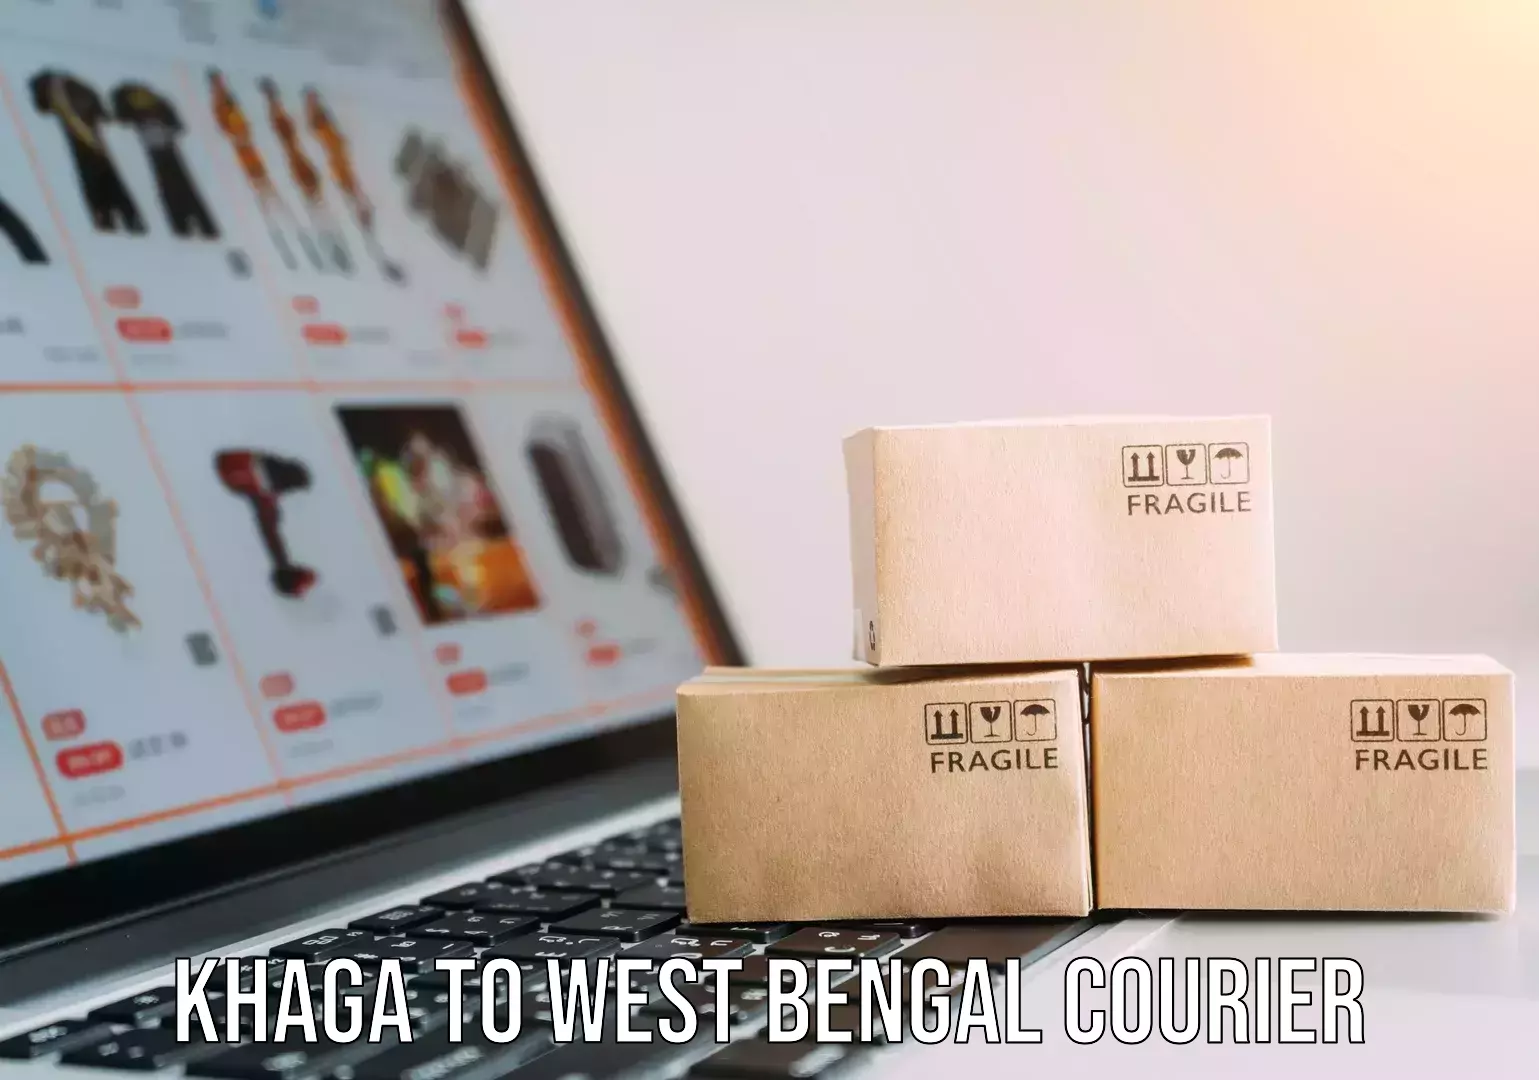 Furniture moving specialists Khaga to West Bengal